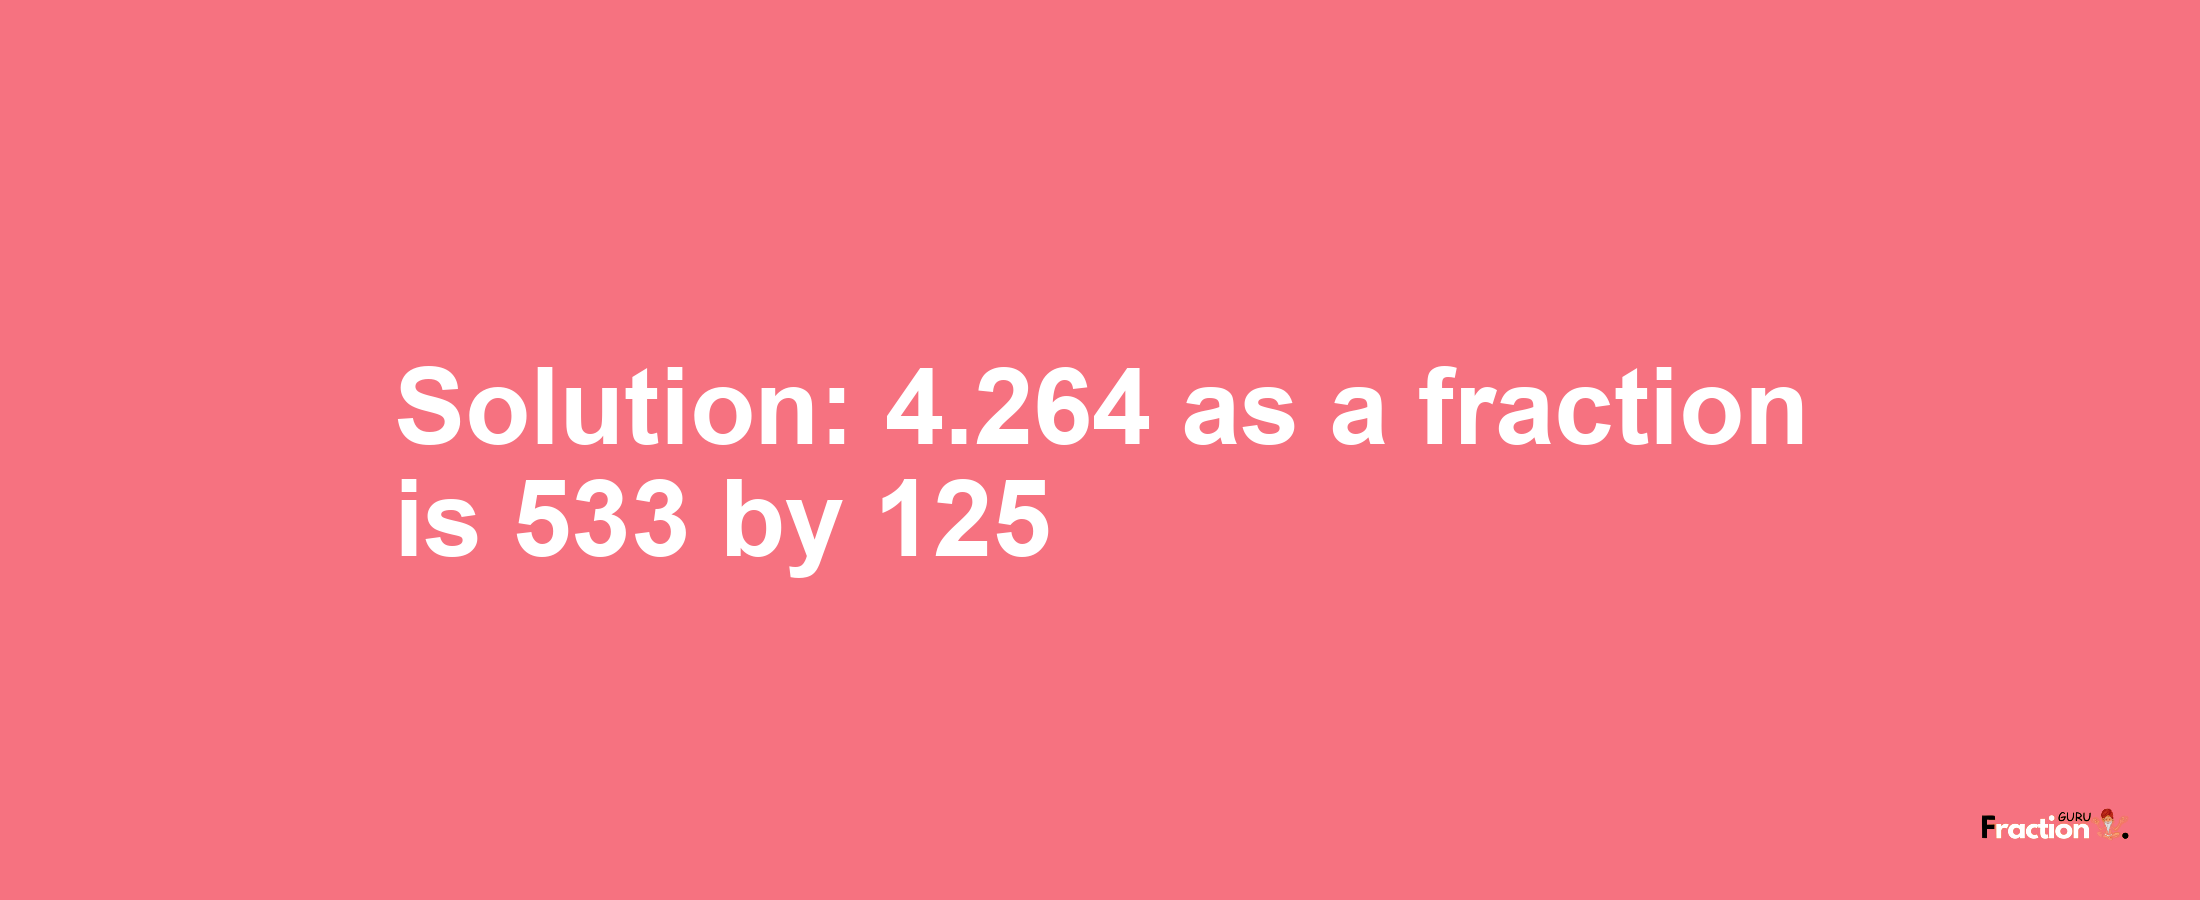 Solution:4.264 as a fraction is 533/125